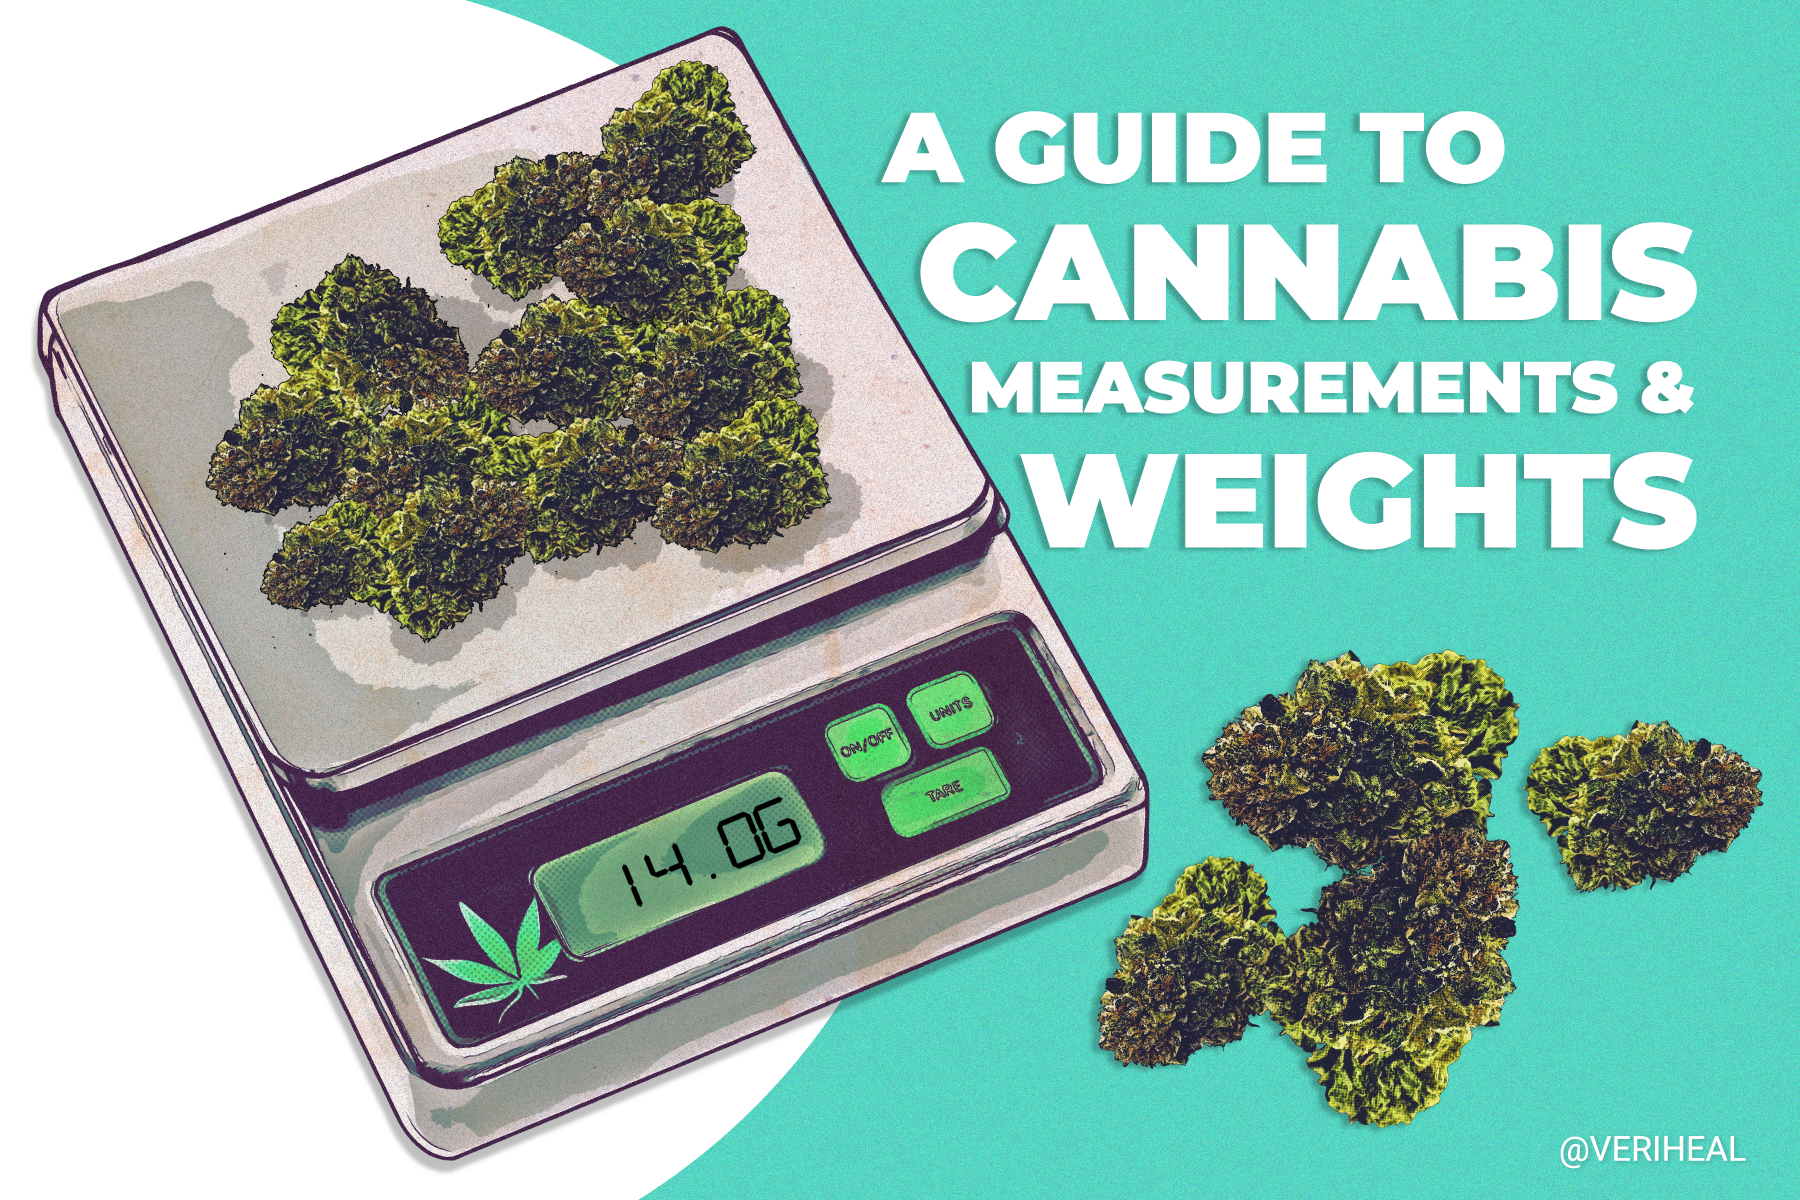 https://www.veriheal.com/blog/wp-content/uploads/2021/11/A-Guide-to-Cannabis-Measurements-and-Weights-.png